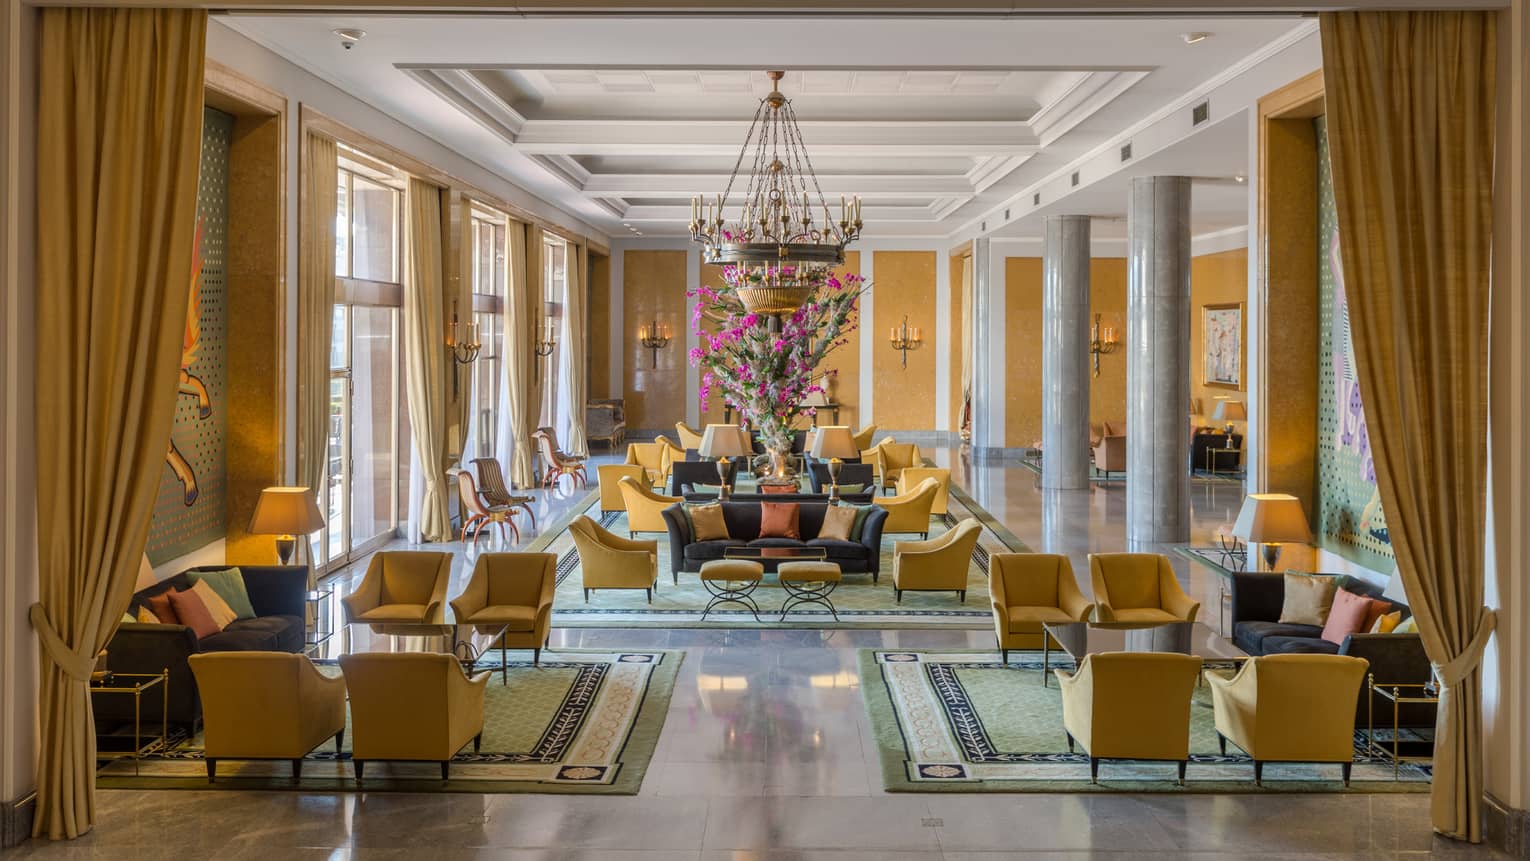 Bright hotel lobby with long gold curtains and armchairs, seating area under chandelier